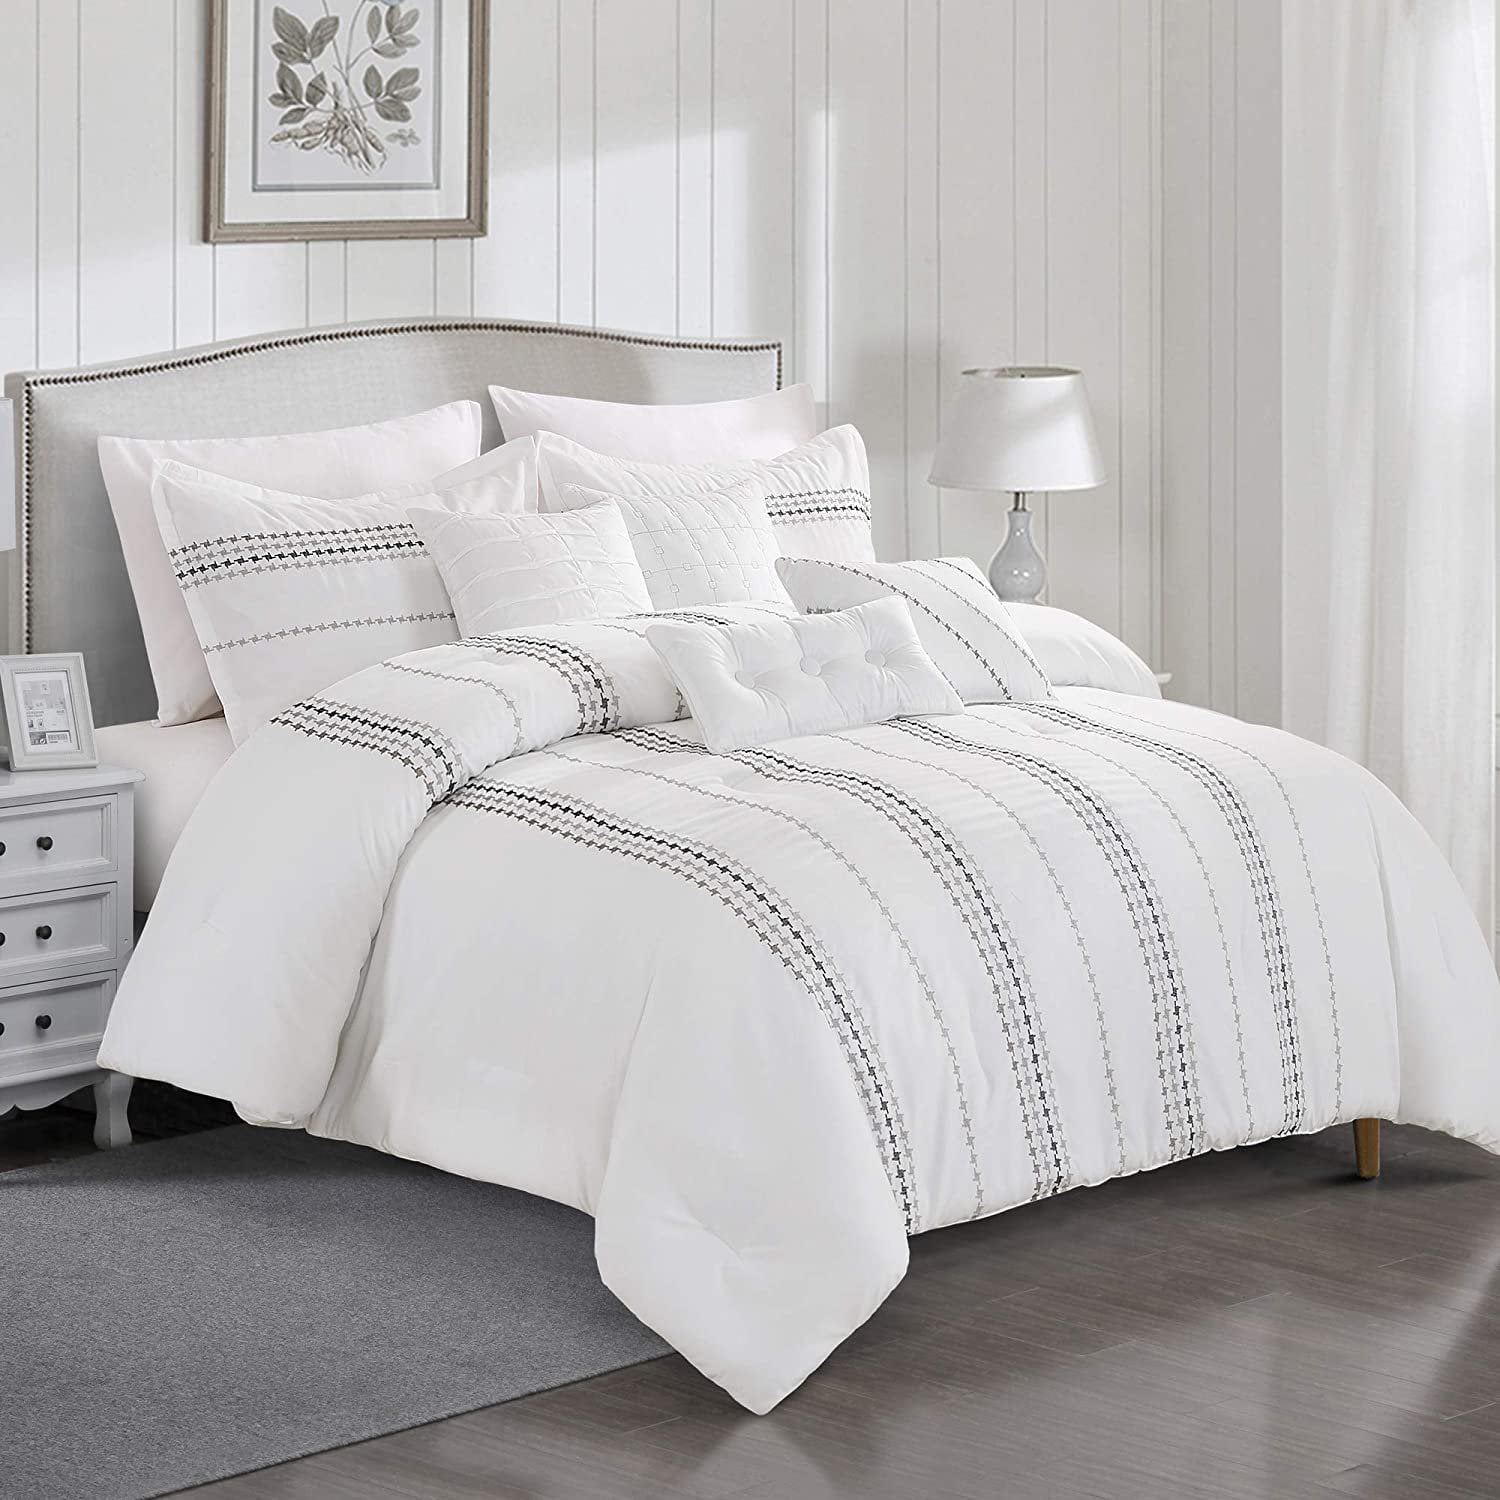 Sapphire Home Luxury 7 Piece Fullqueen Comforter Set With Shams And Cushions Classy Embroidery